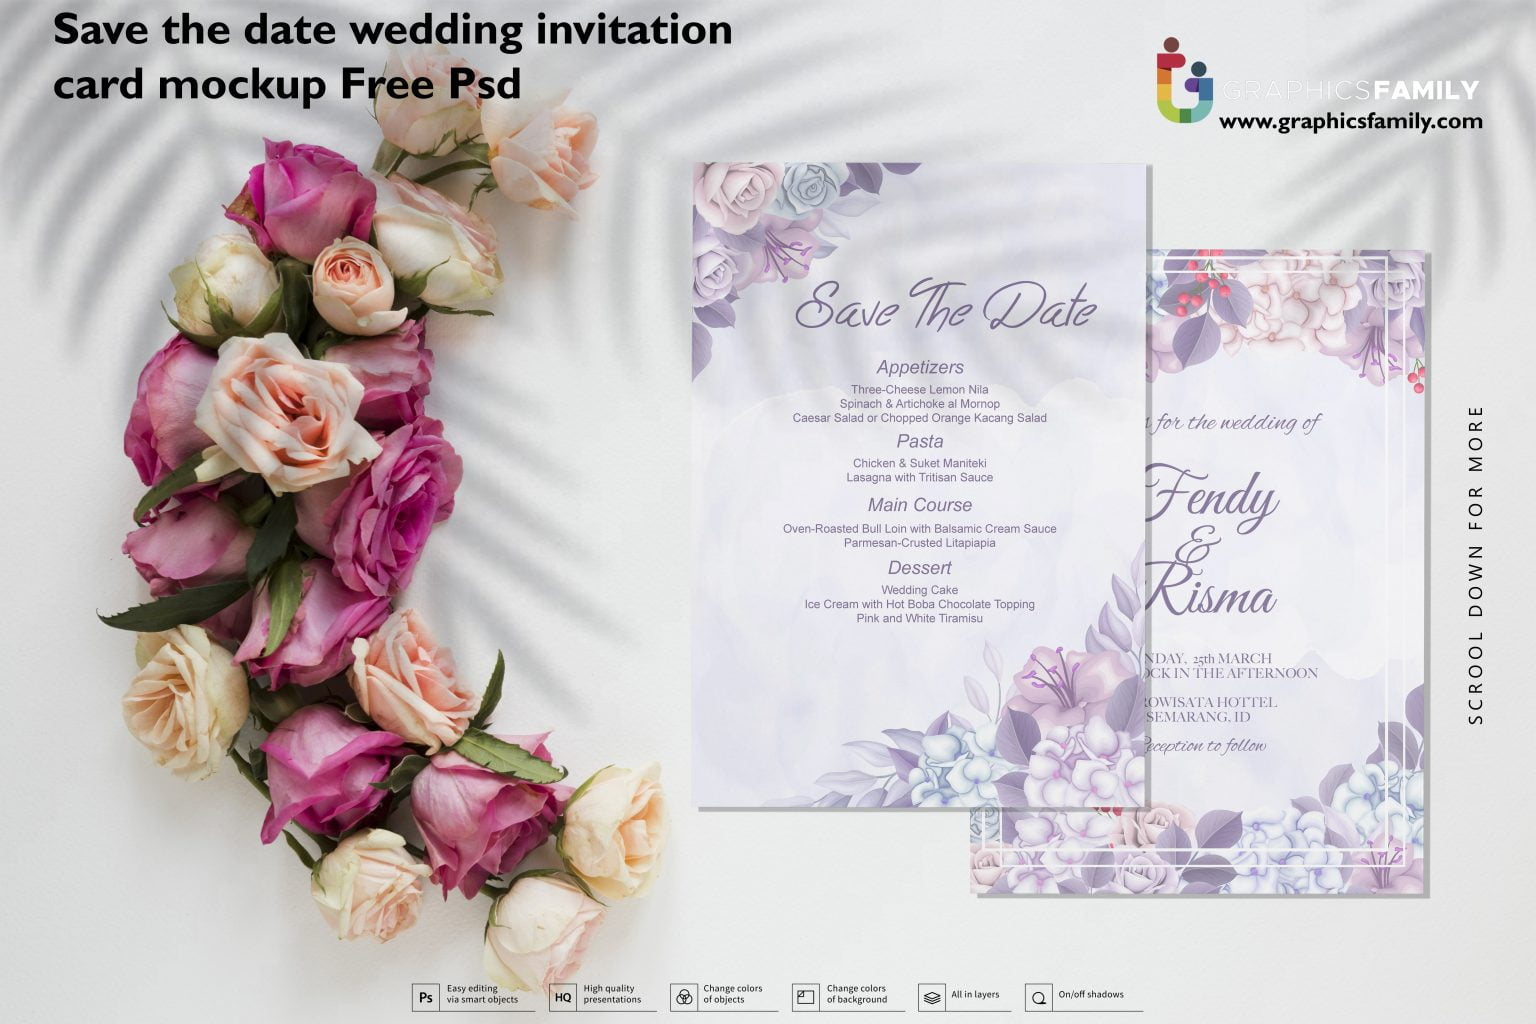 Download Save the date wedding invitation card mockup Free PSD - GraphicsFamily